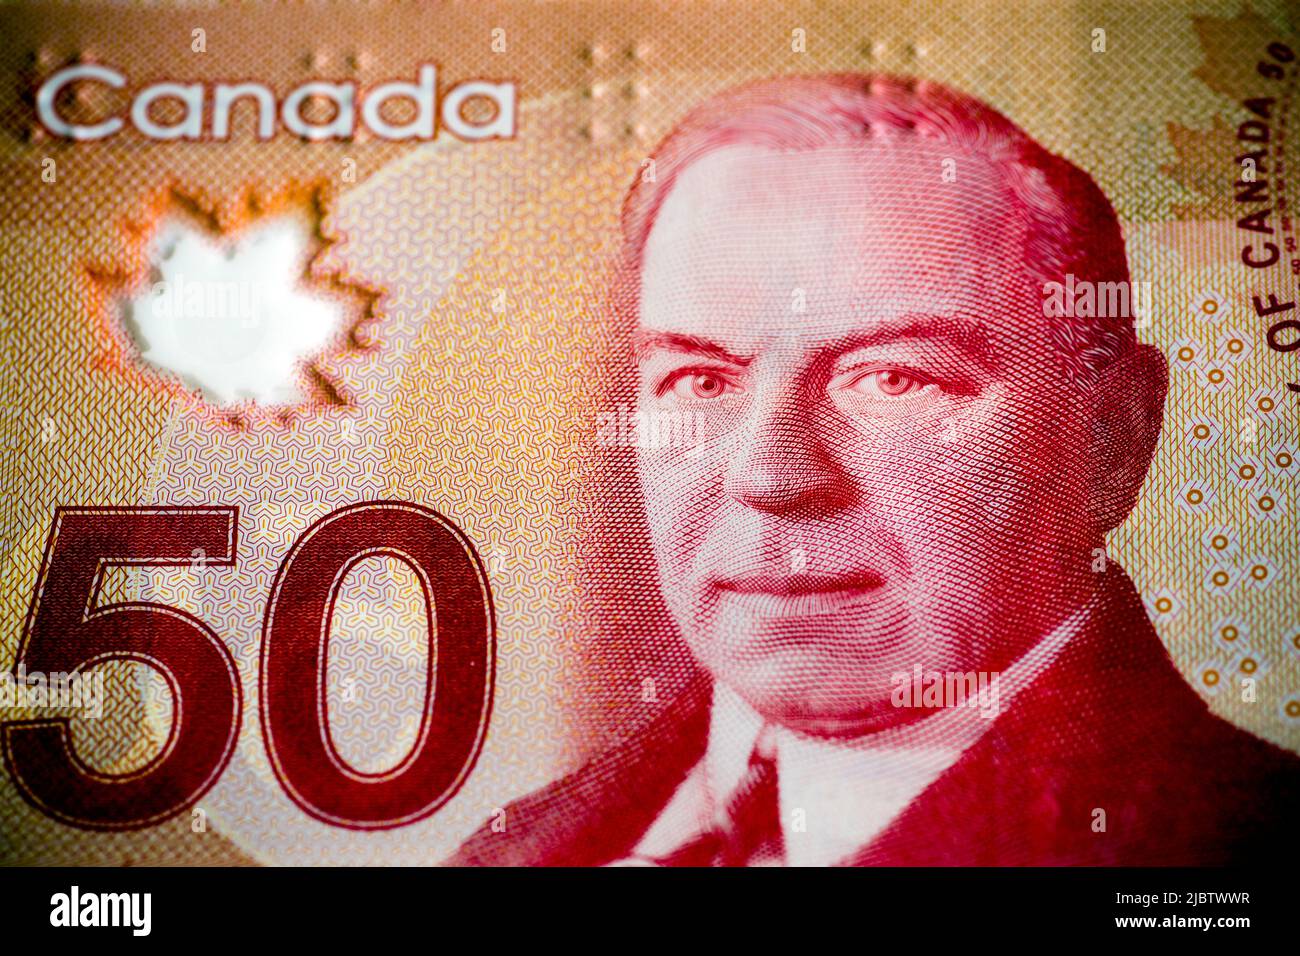 Close up detail of the Canadian 50 dollar bill featuring the face of William Lyon Mackenzie King (1874-1950), the famously eccentric prime minister wh Stock Photo